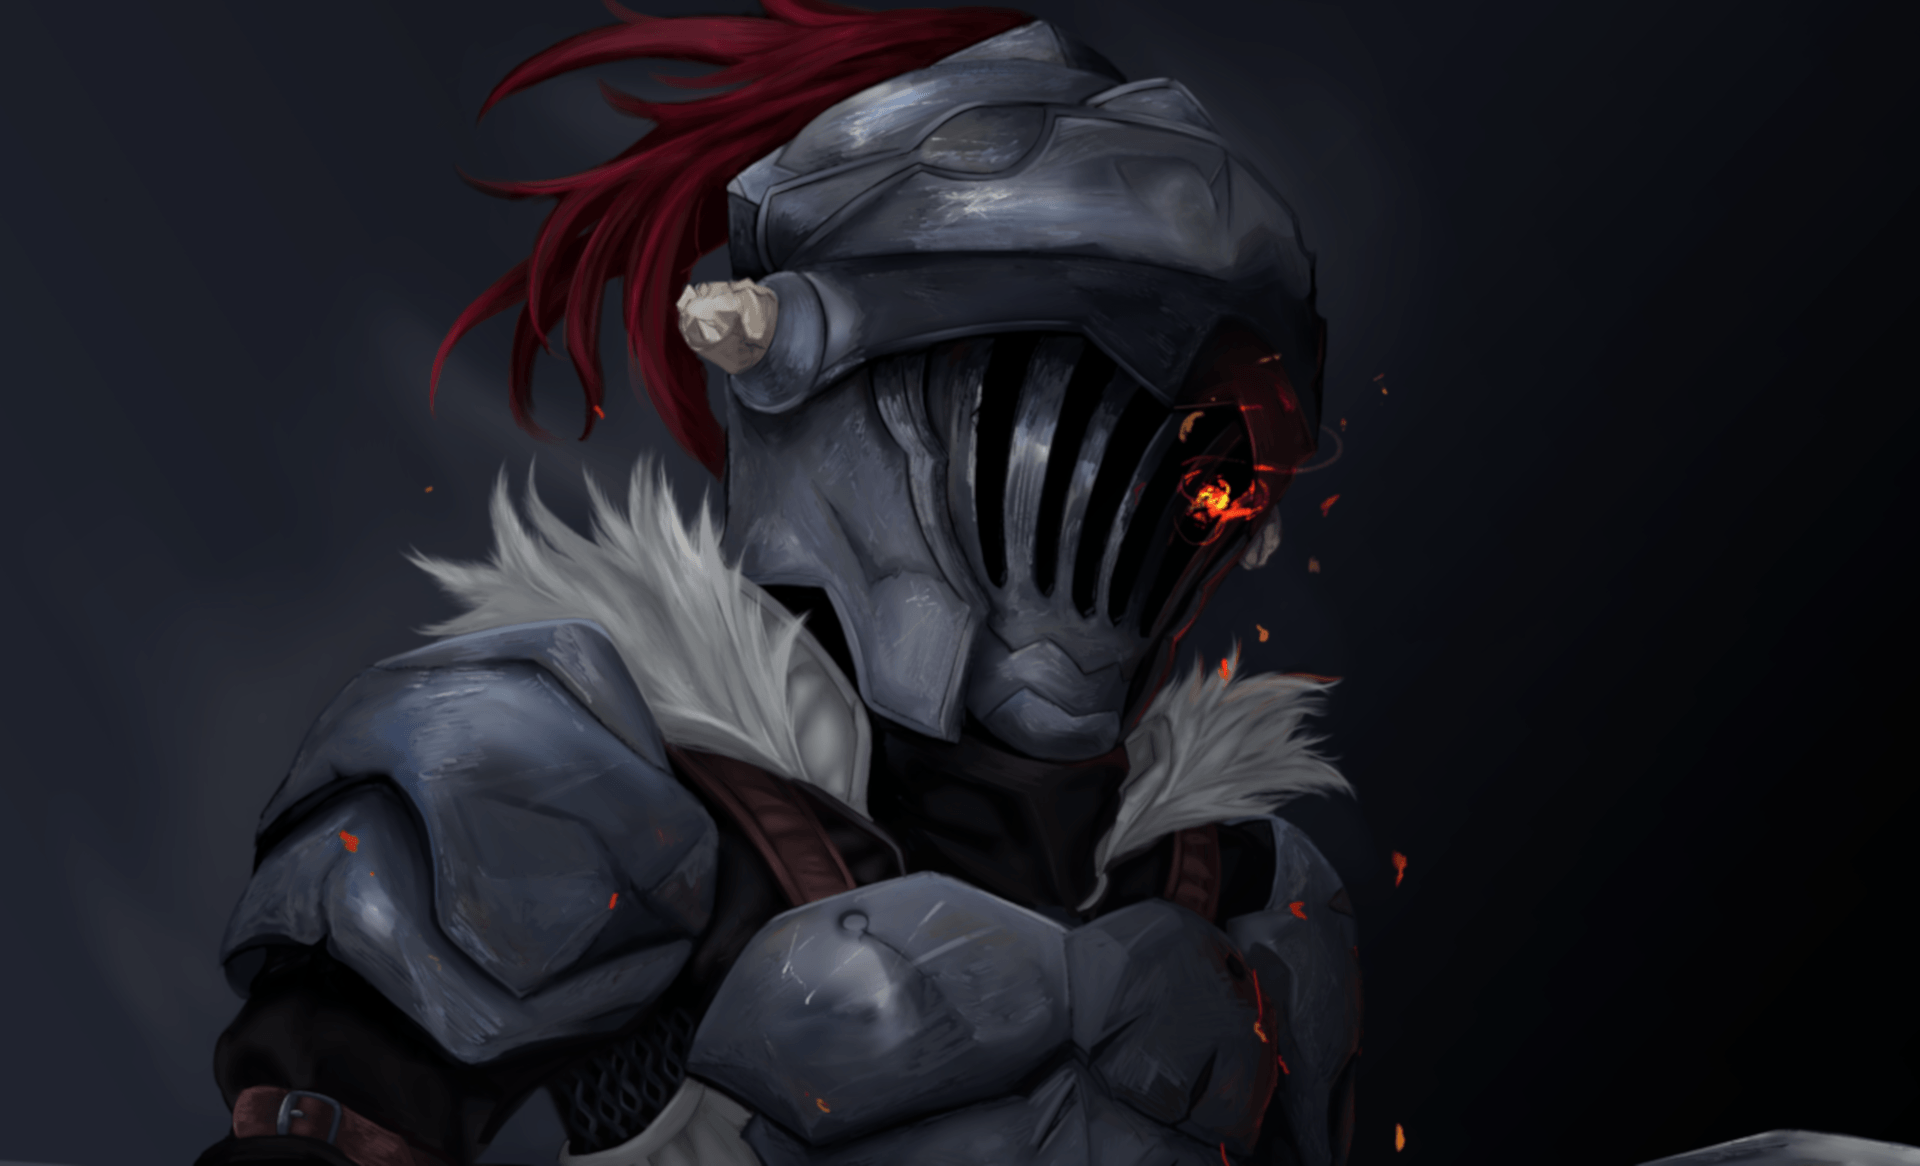 200+ Goblin Slayer HD Wallpapers and Backgrounds